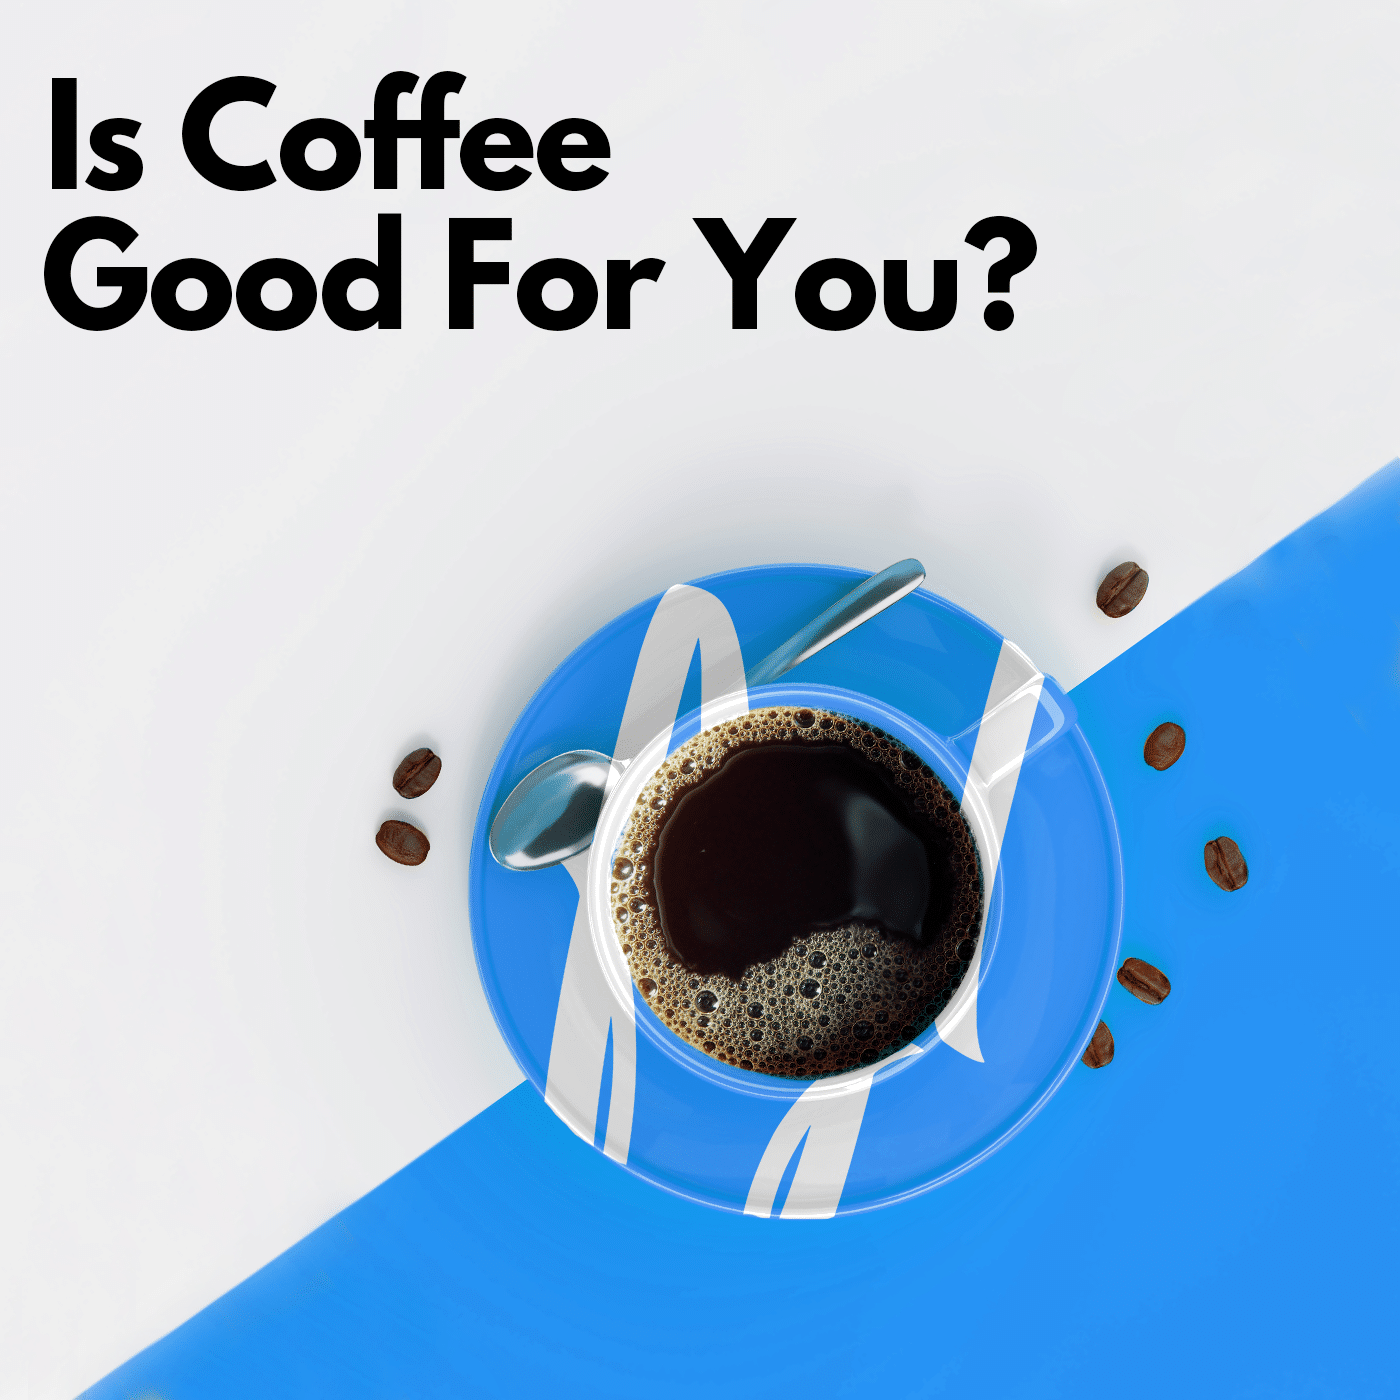 Is Coffee Good For You?